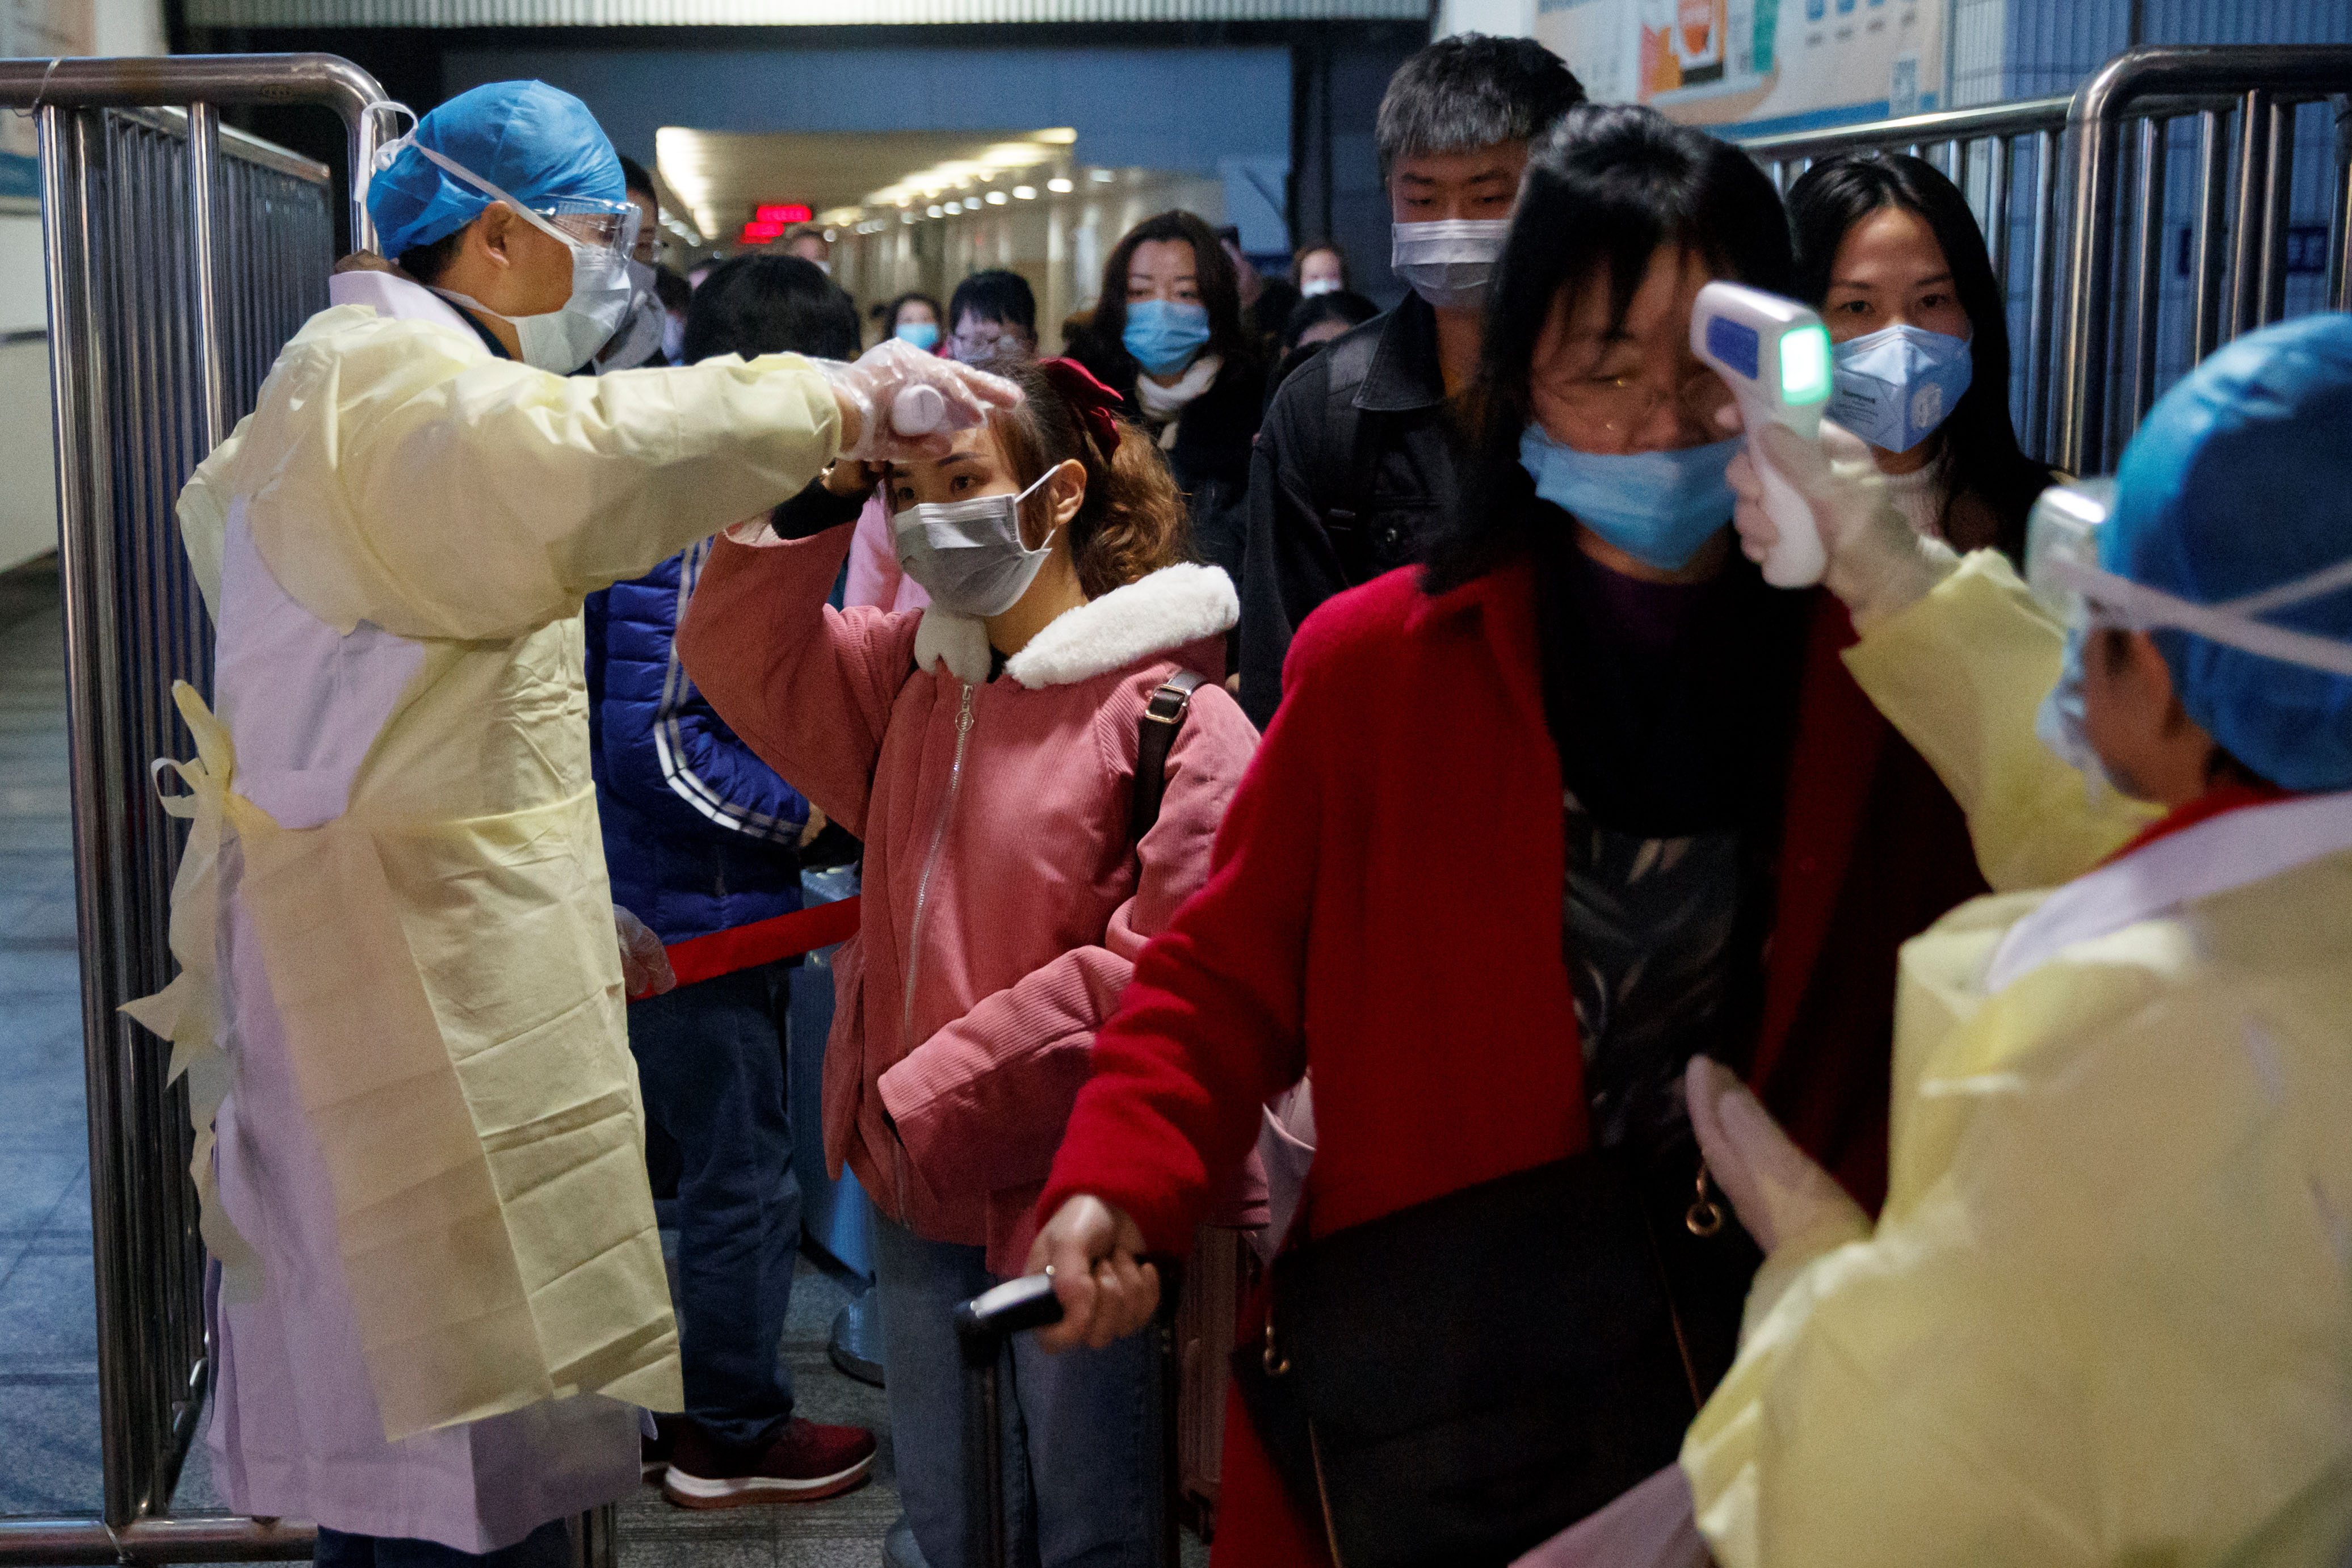 Medical workers take the temperature of passengers after they got off the train in Jiujiang, Jiangxi province, China, as the country is hit by an outbreak of a new coronavirus, January 29, 2020. Photo: Reuters